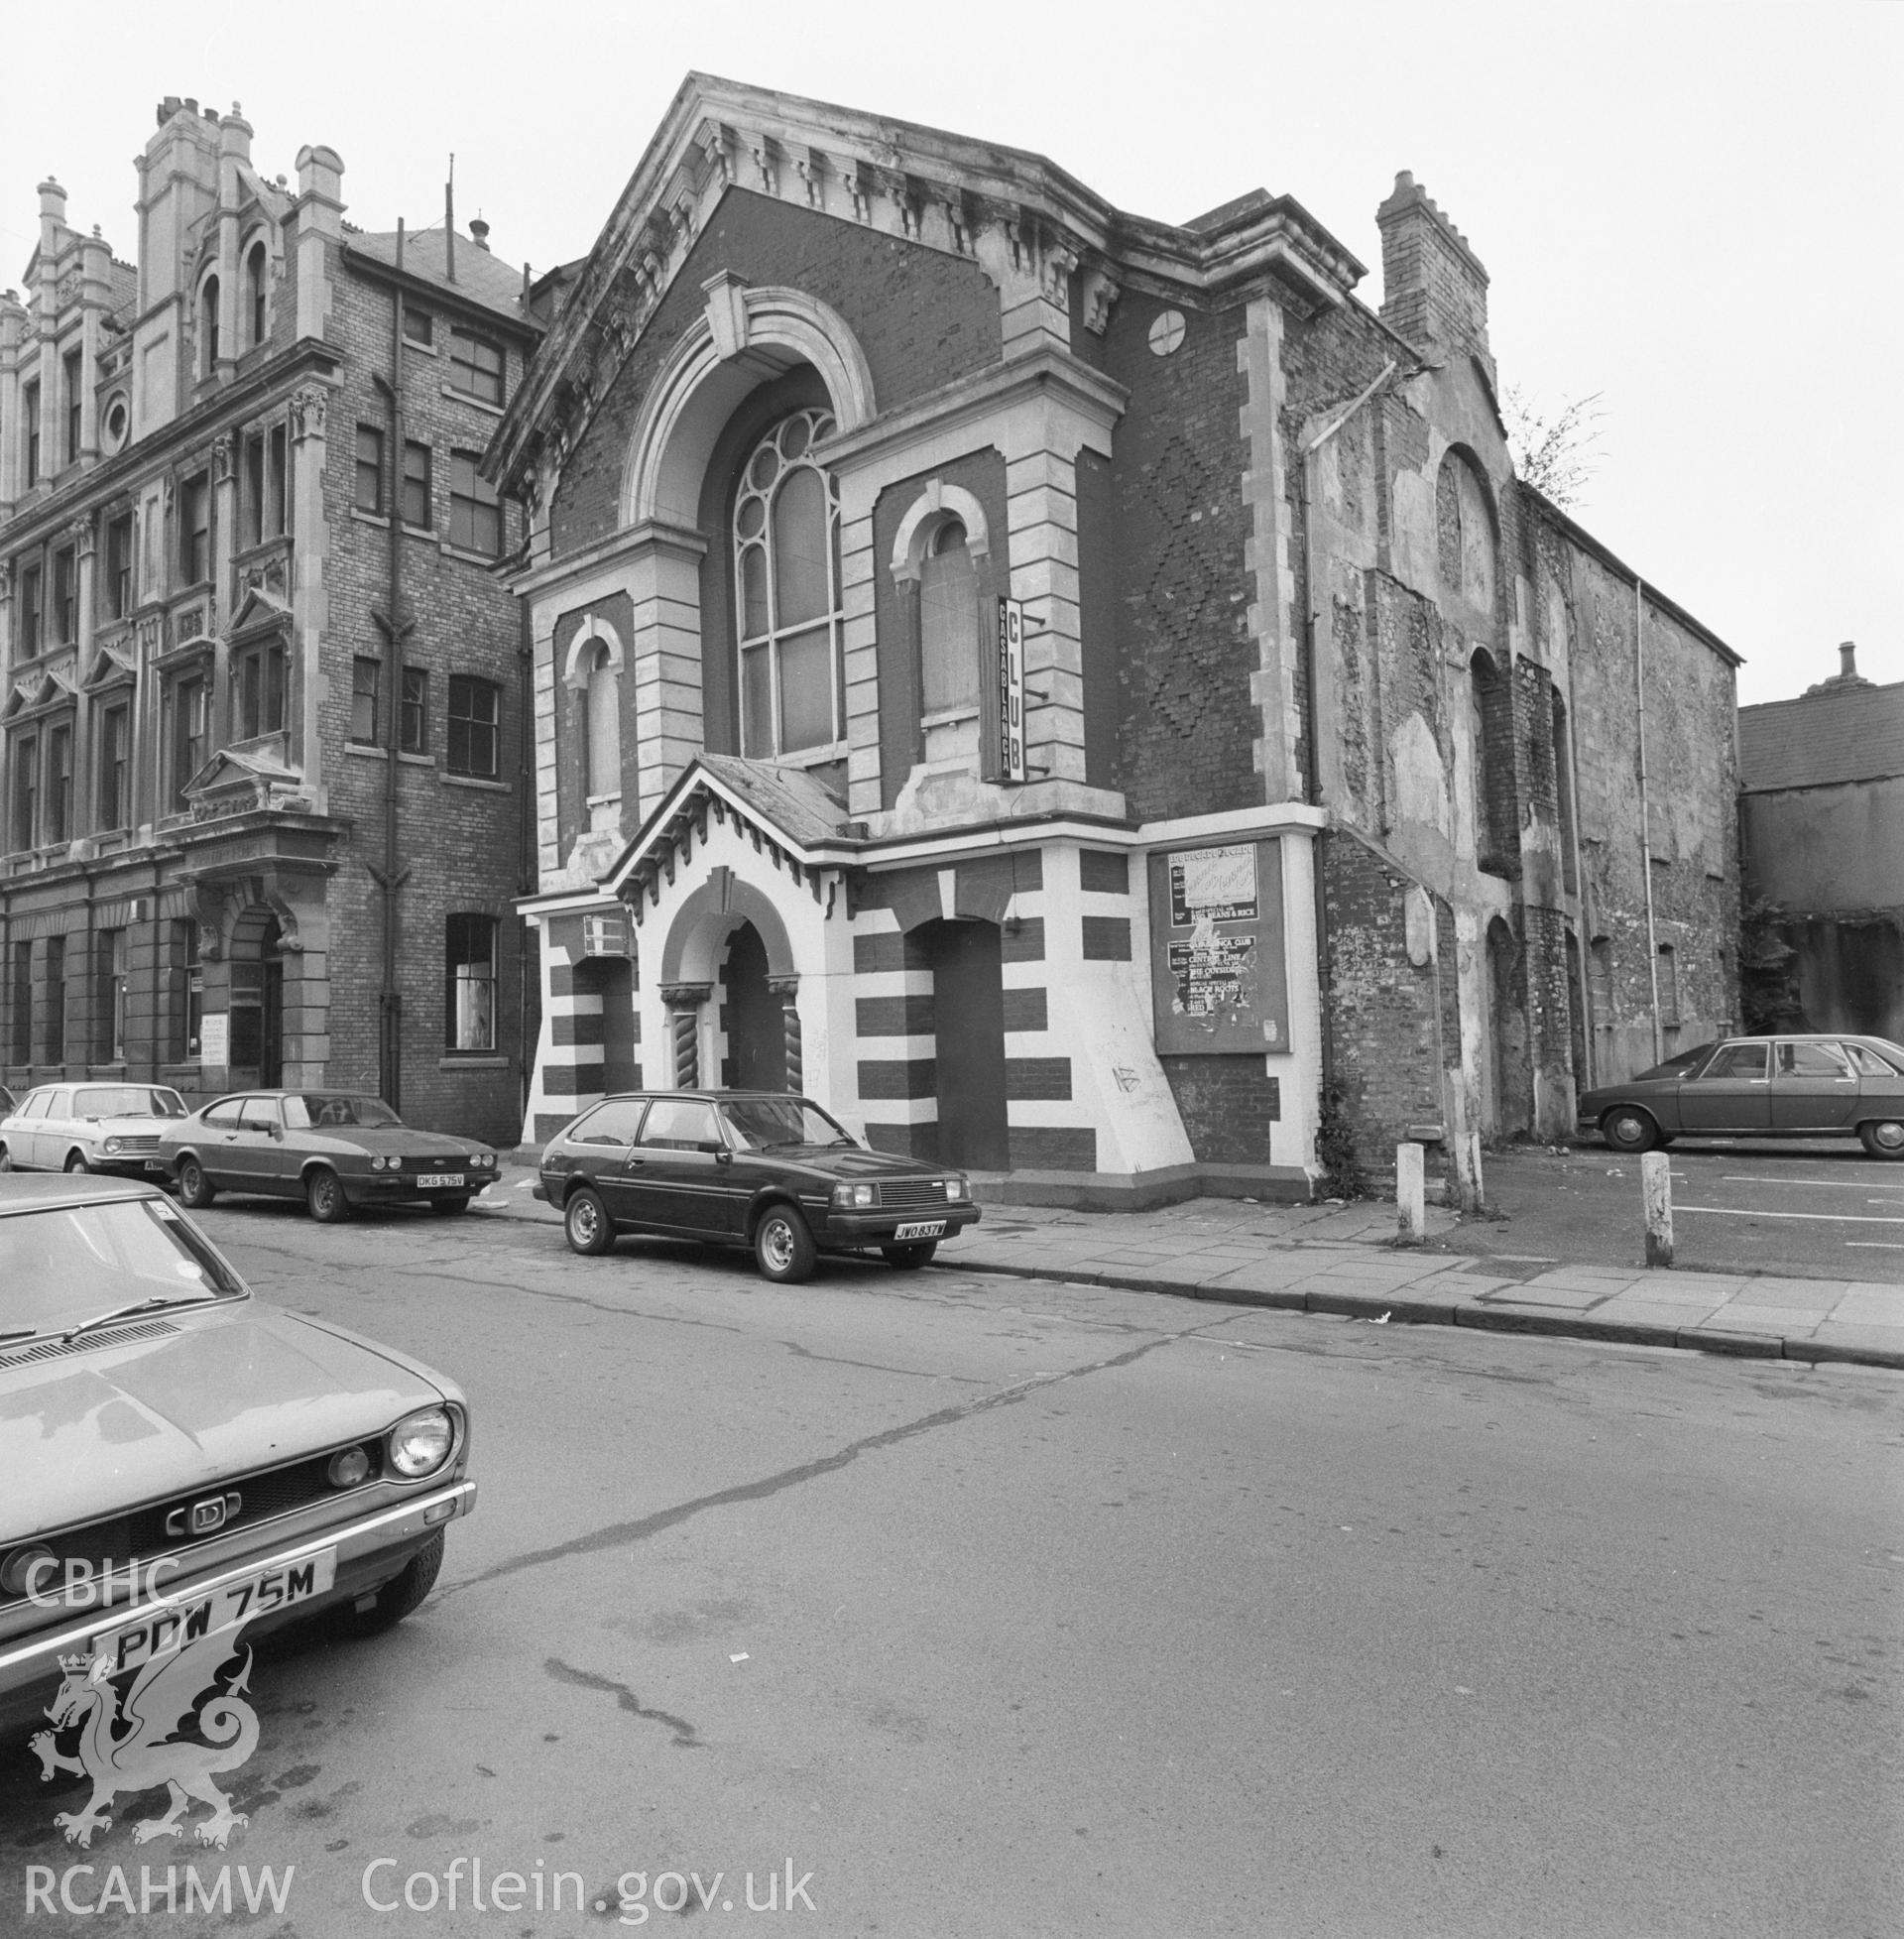 Digital copy of a black and white negative showing view of Bethel English Baptist Chapel. Casablanca Club, Cardiff.